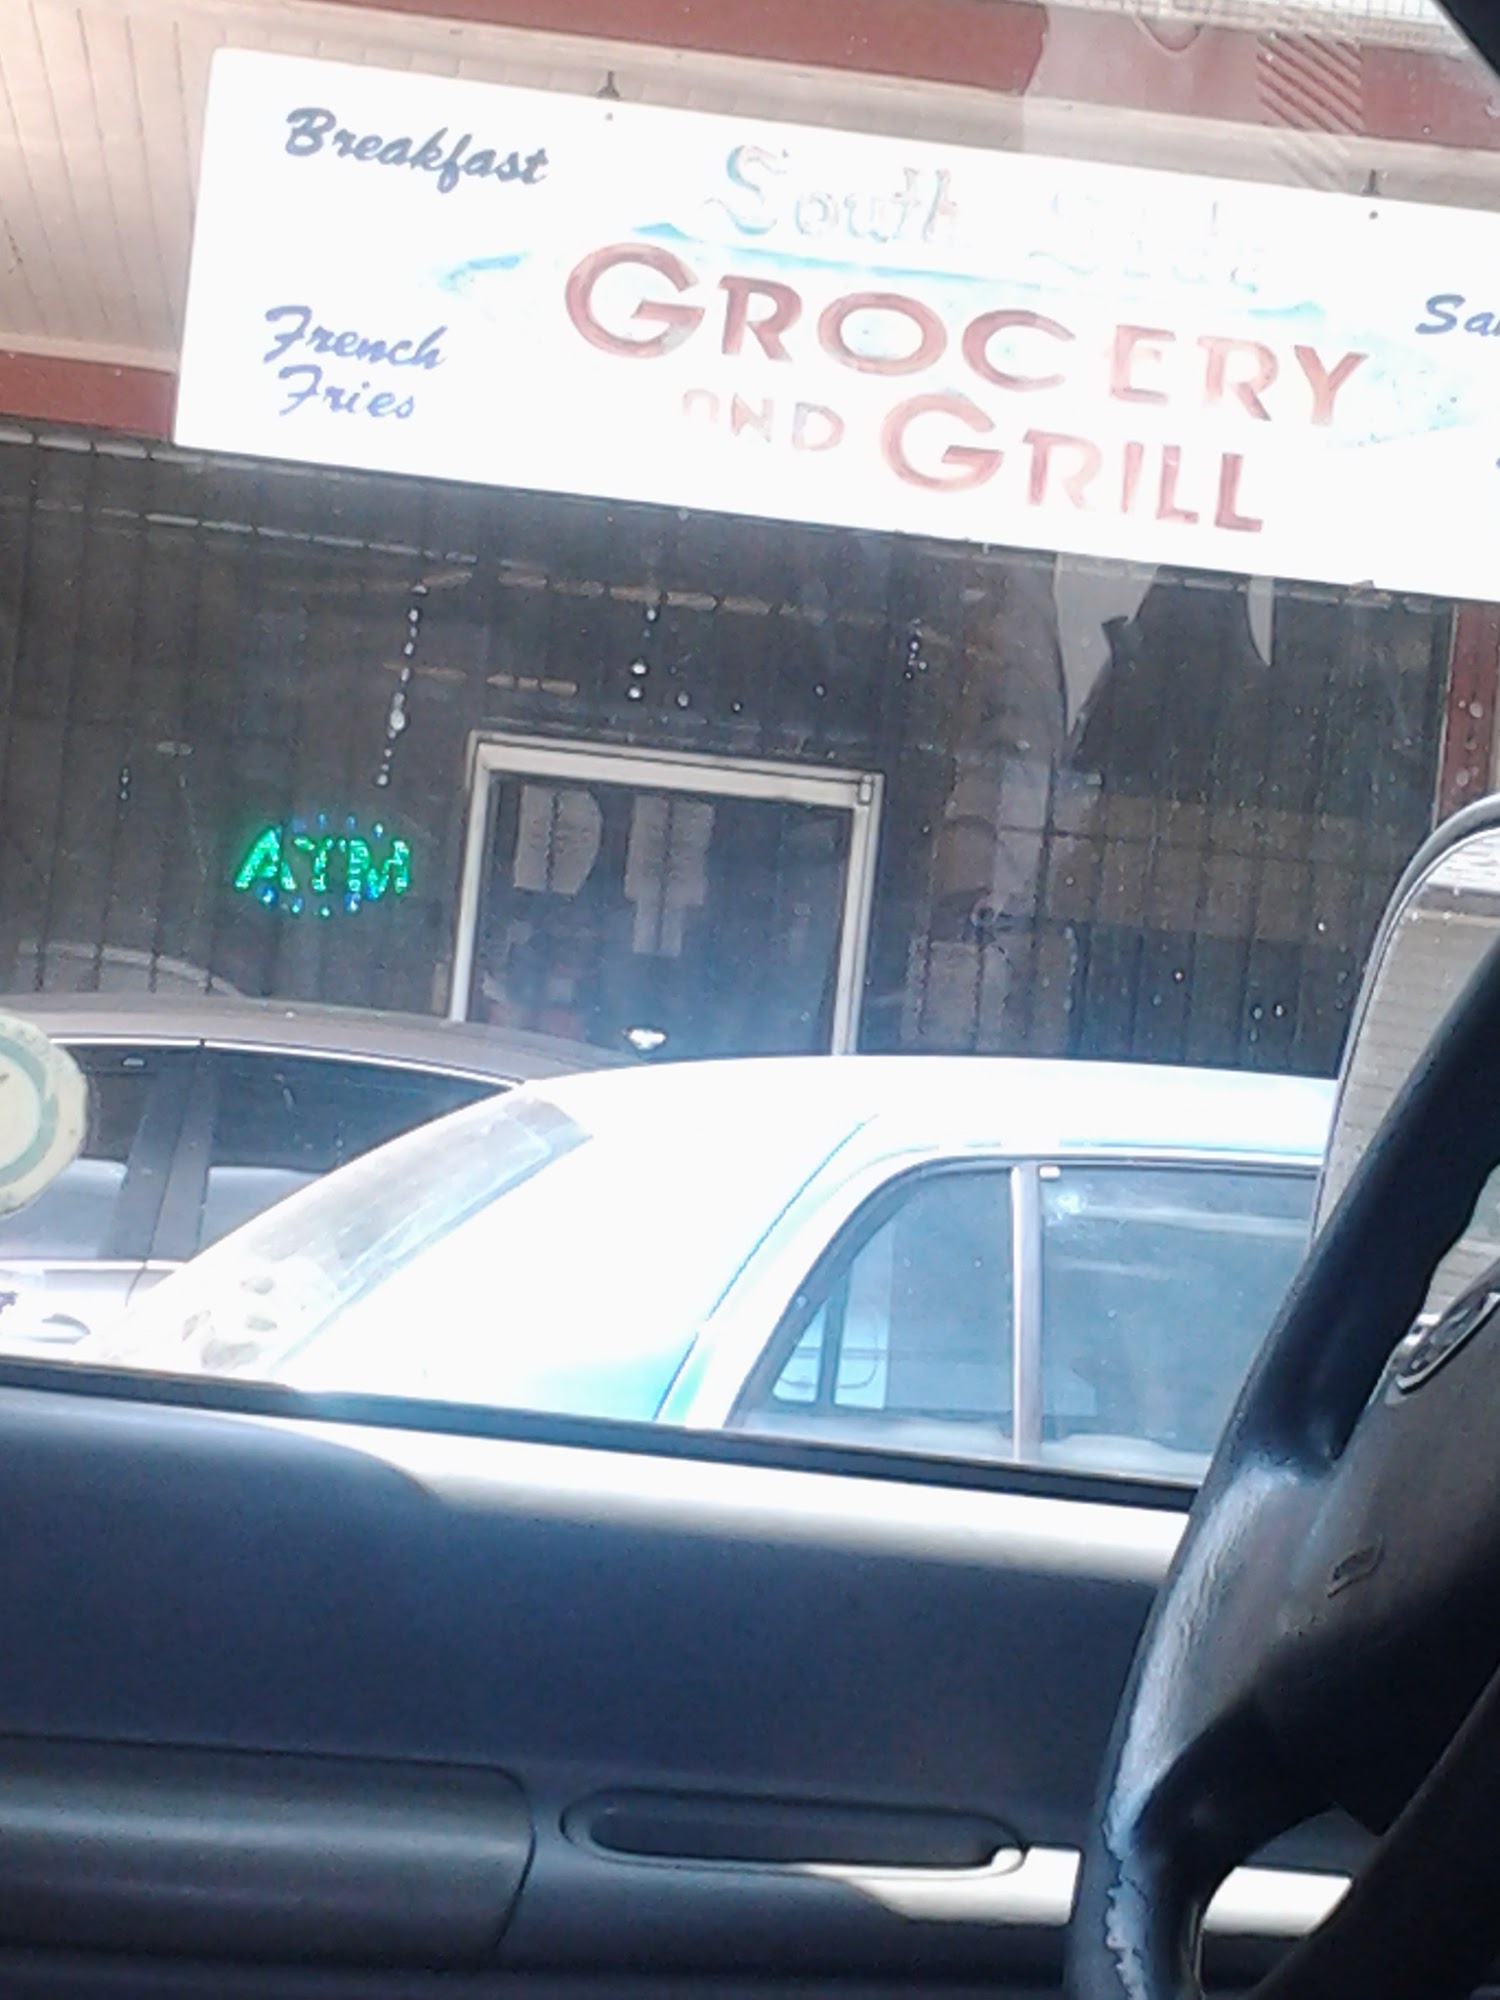 Southside Grocery & Grill